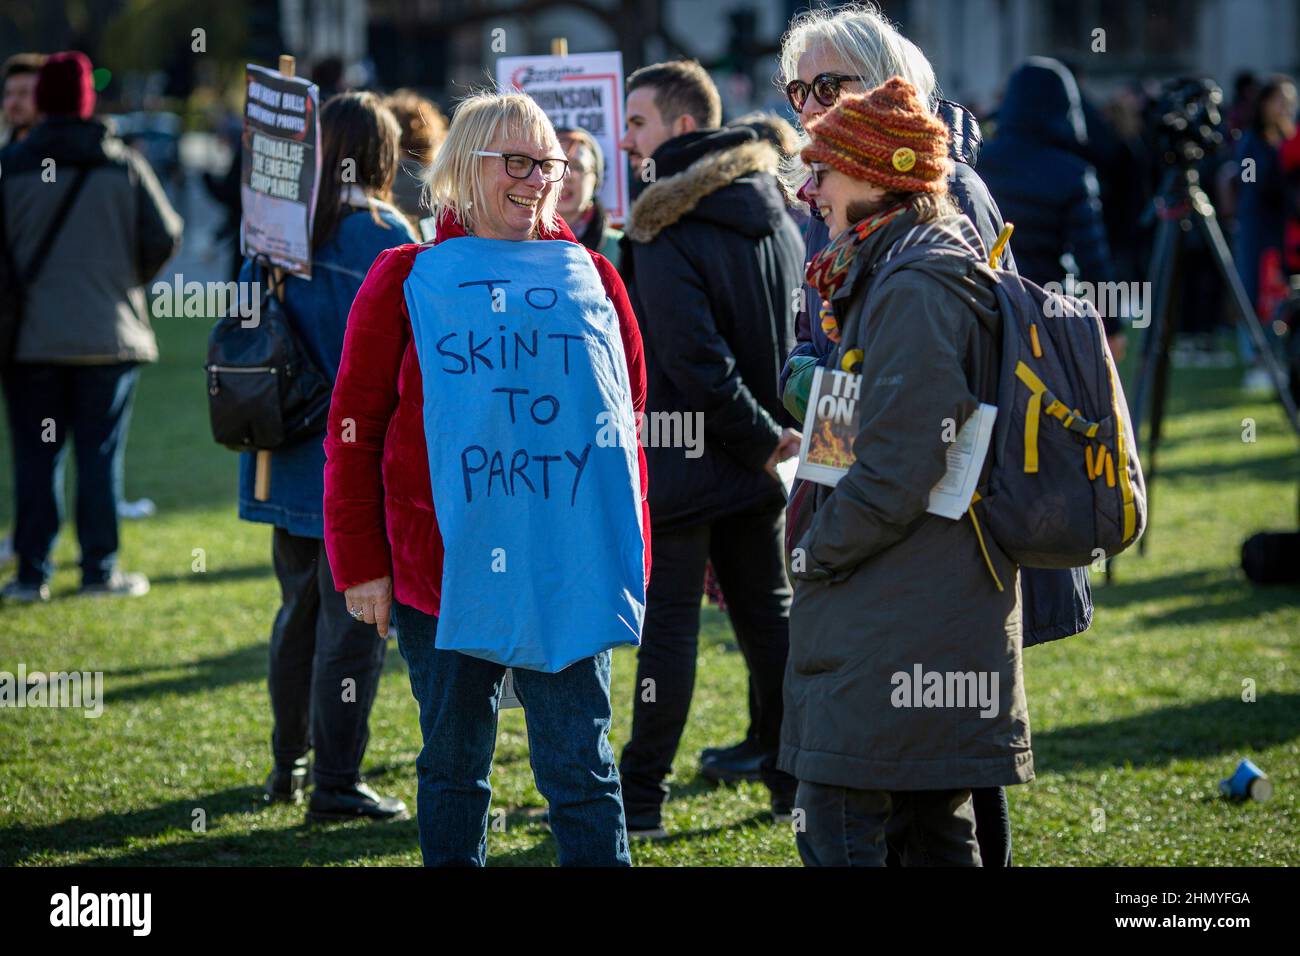 London, UK 12 th February 2022. Female wearing t-shirt 'To skint to party ' in protest against the rises in fuel prices and costs. Stock Photo